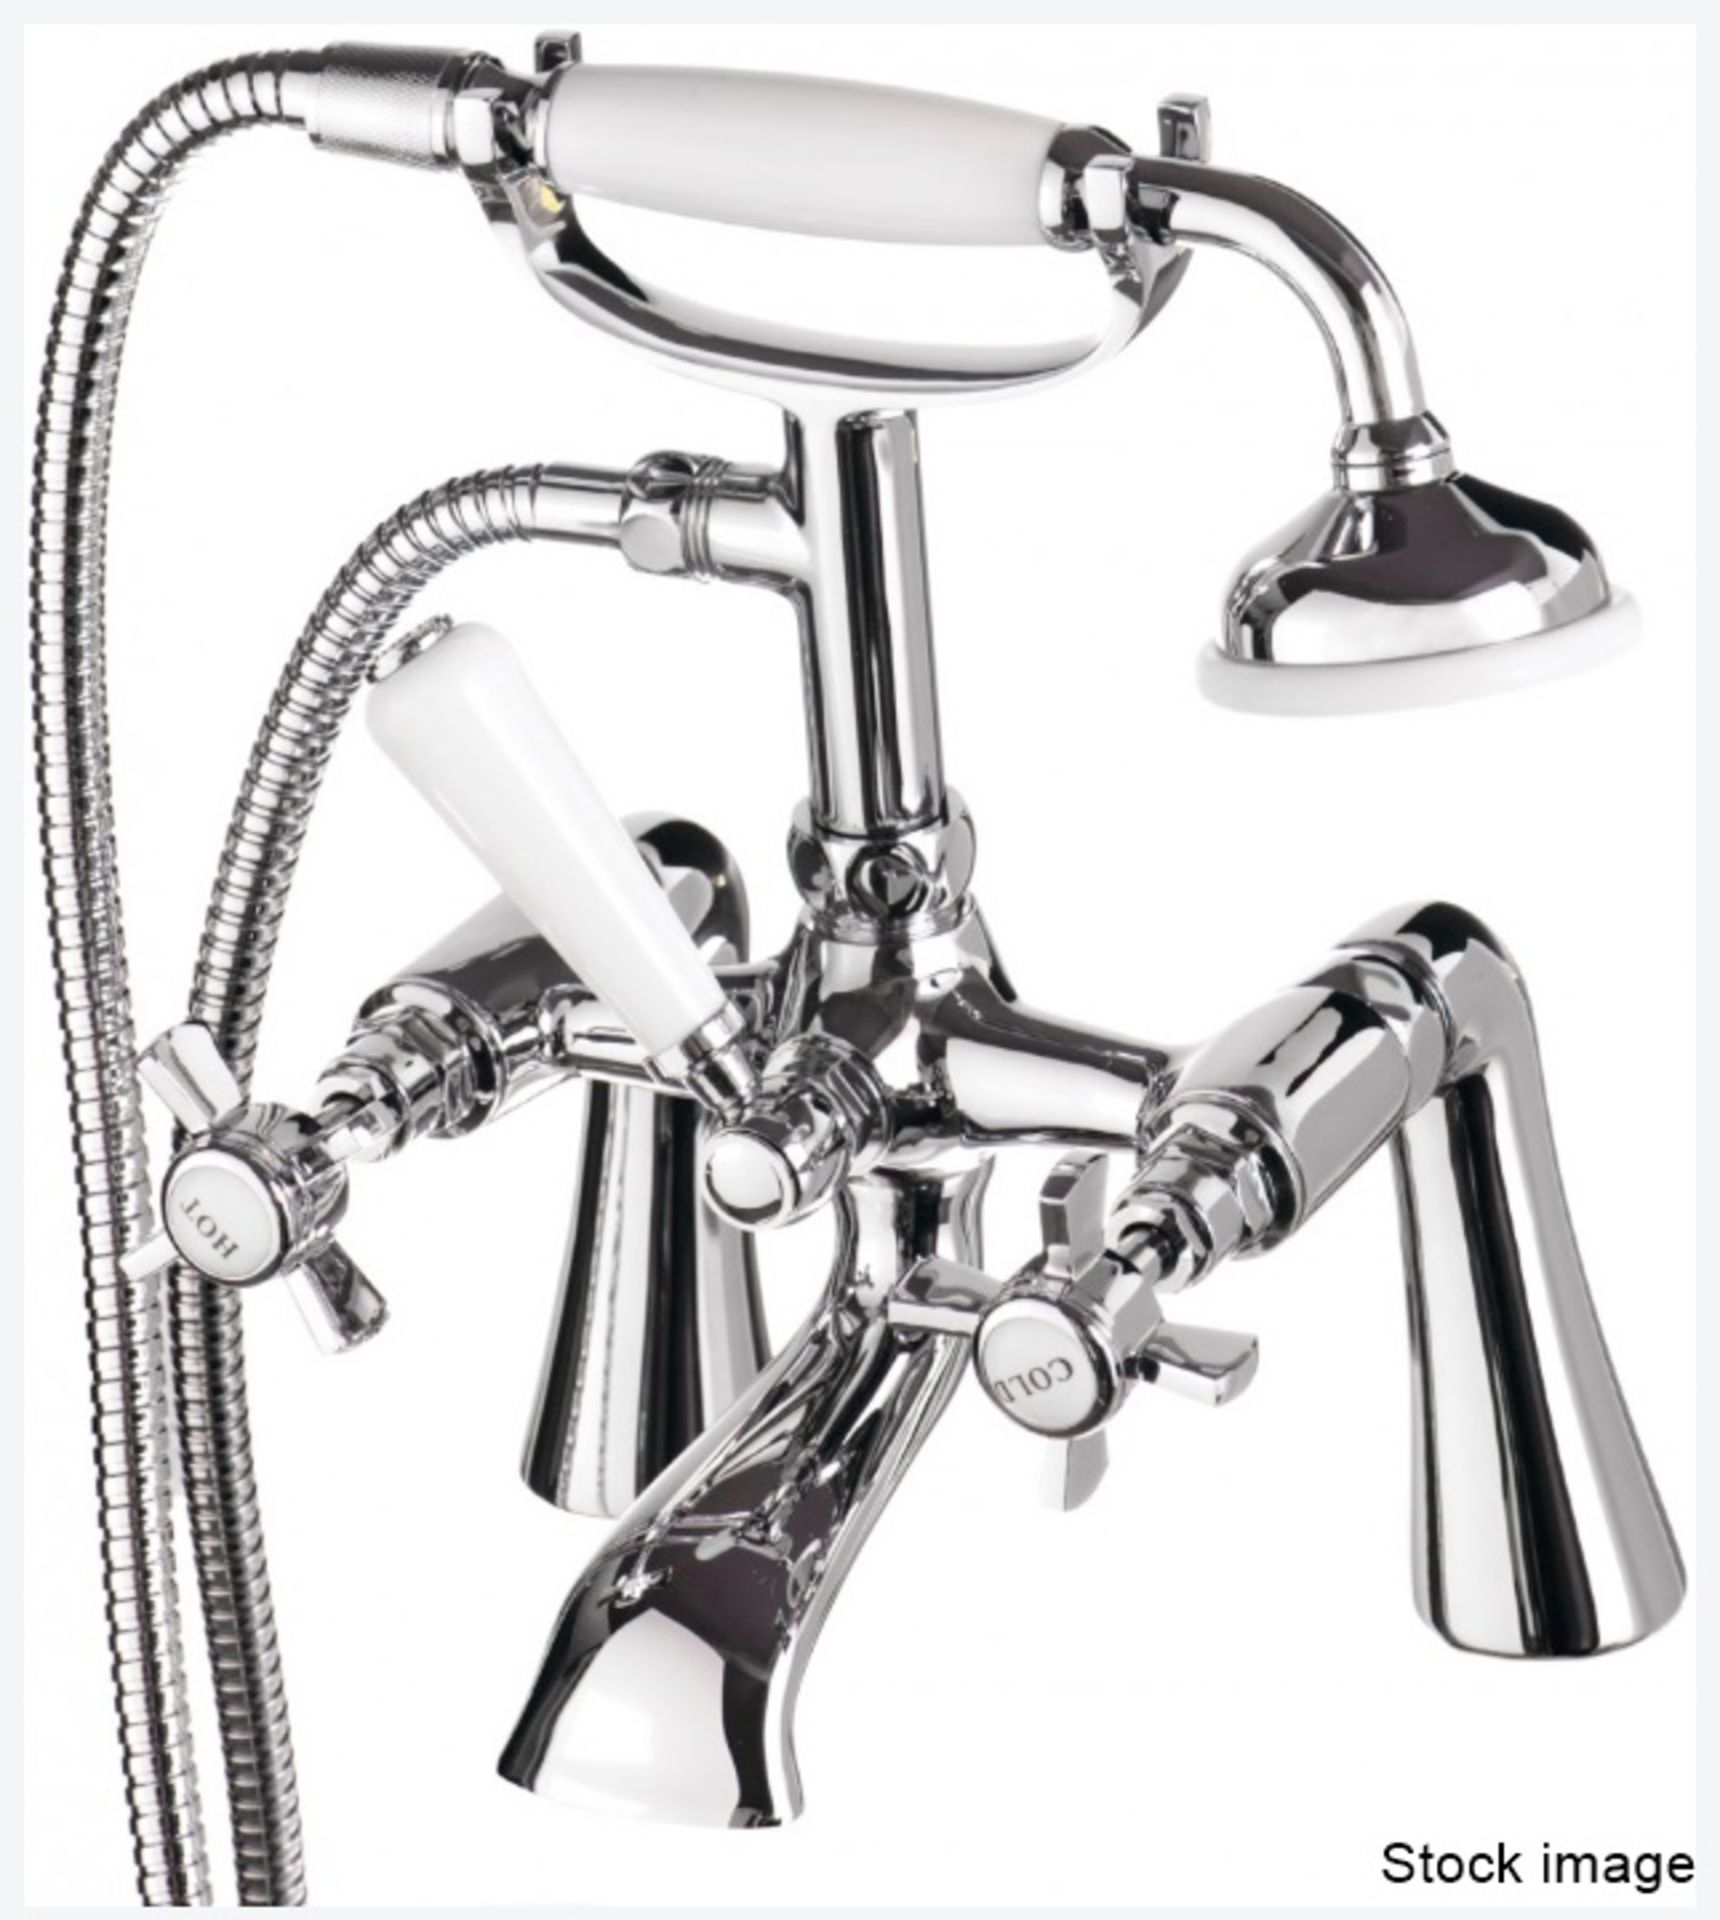 1 x CASSELLIE 'Time' Traditional Bath Mixer Tap With Shower Hose - Ref: TIM002 - New & Boxed Stock -